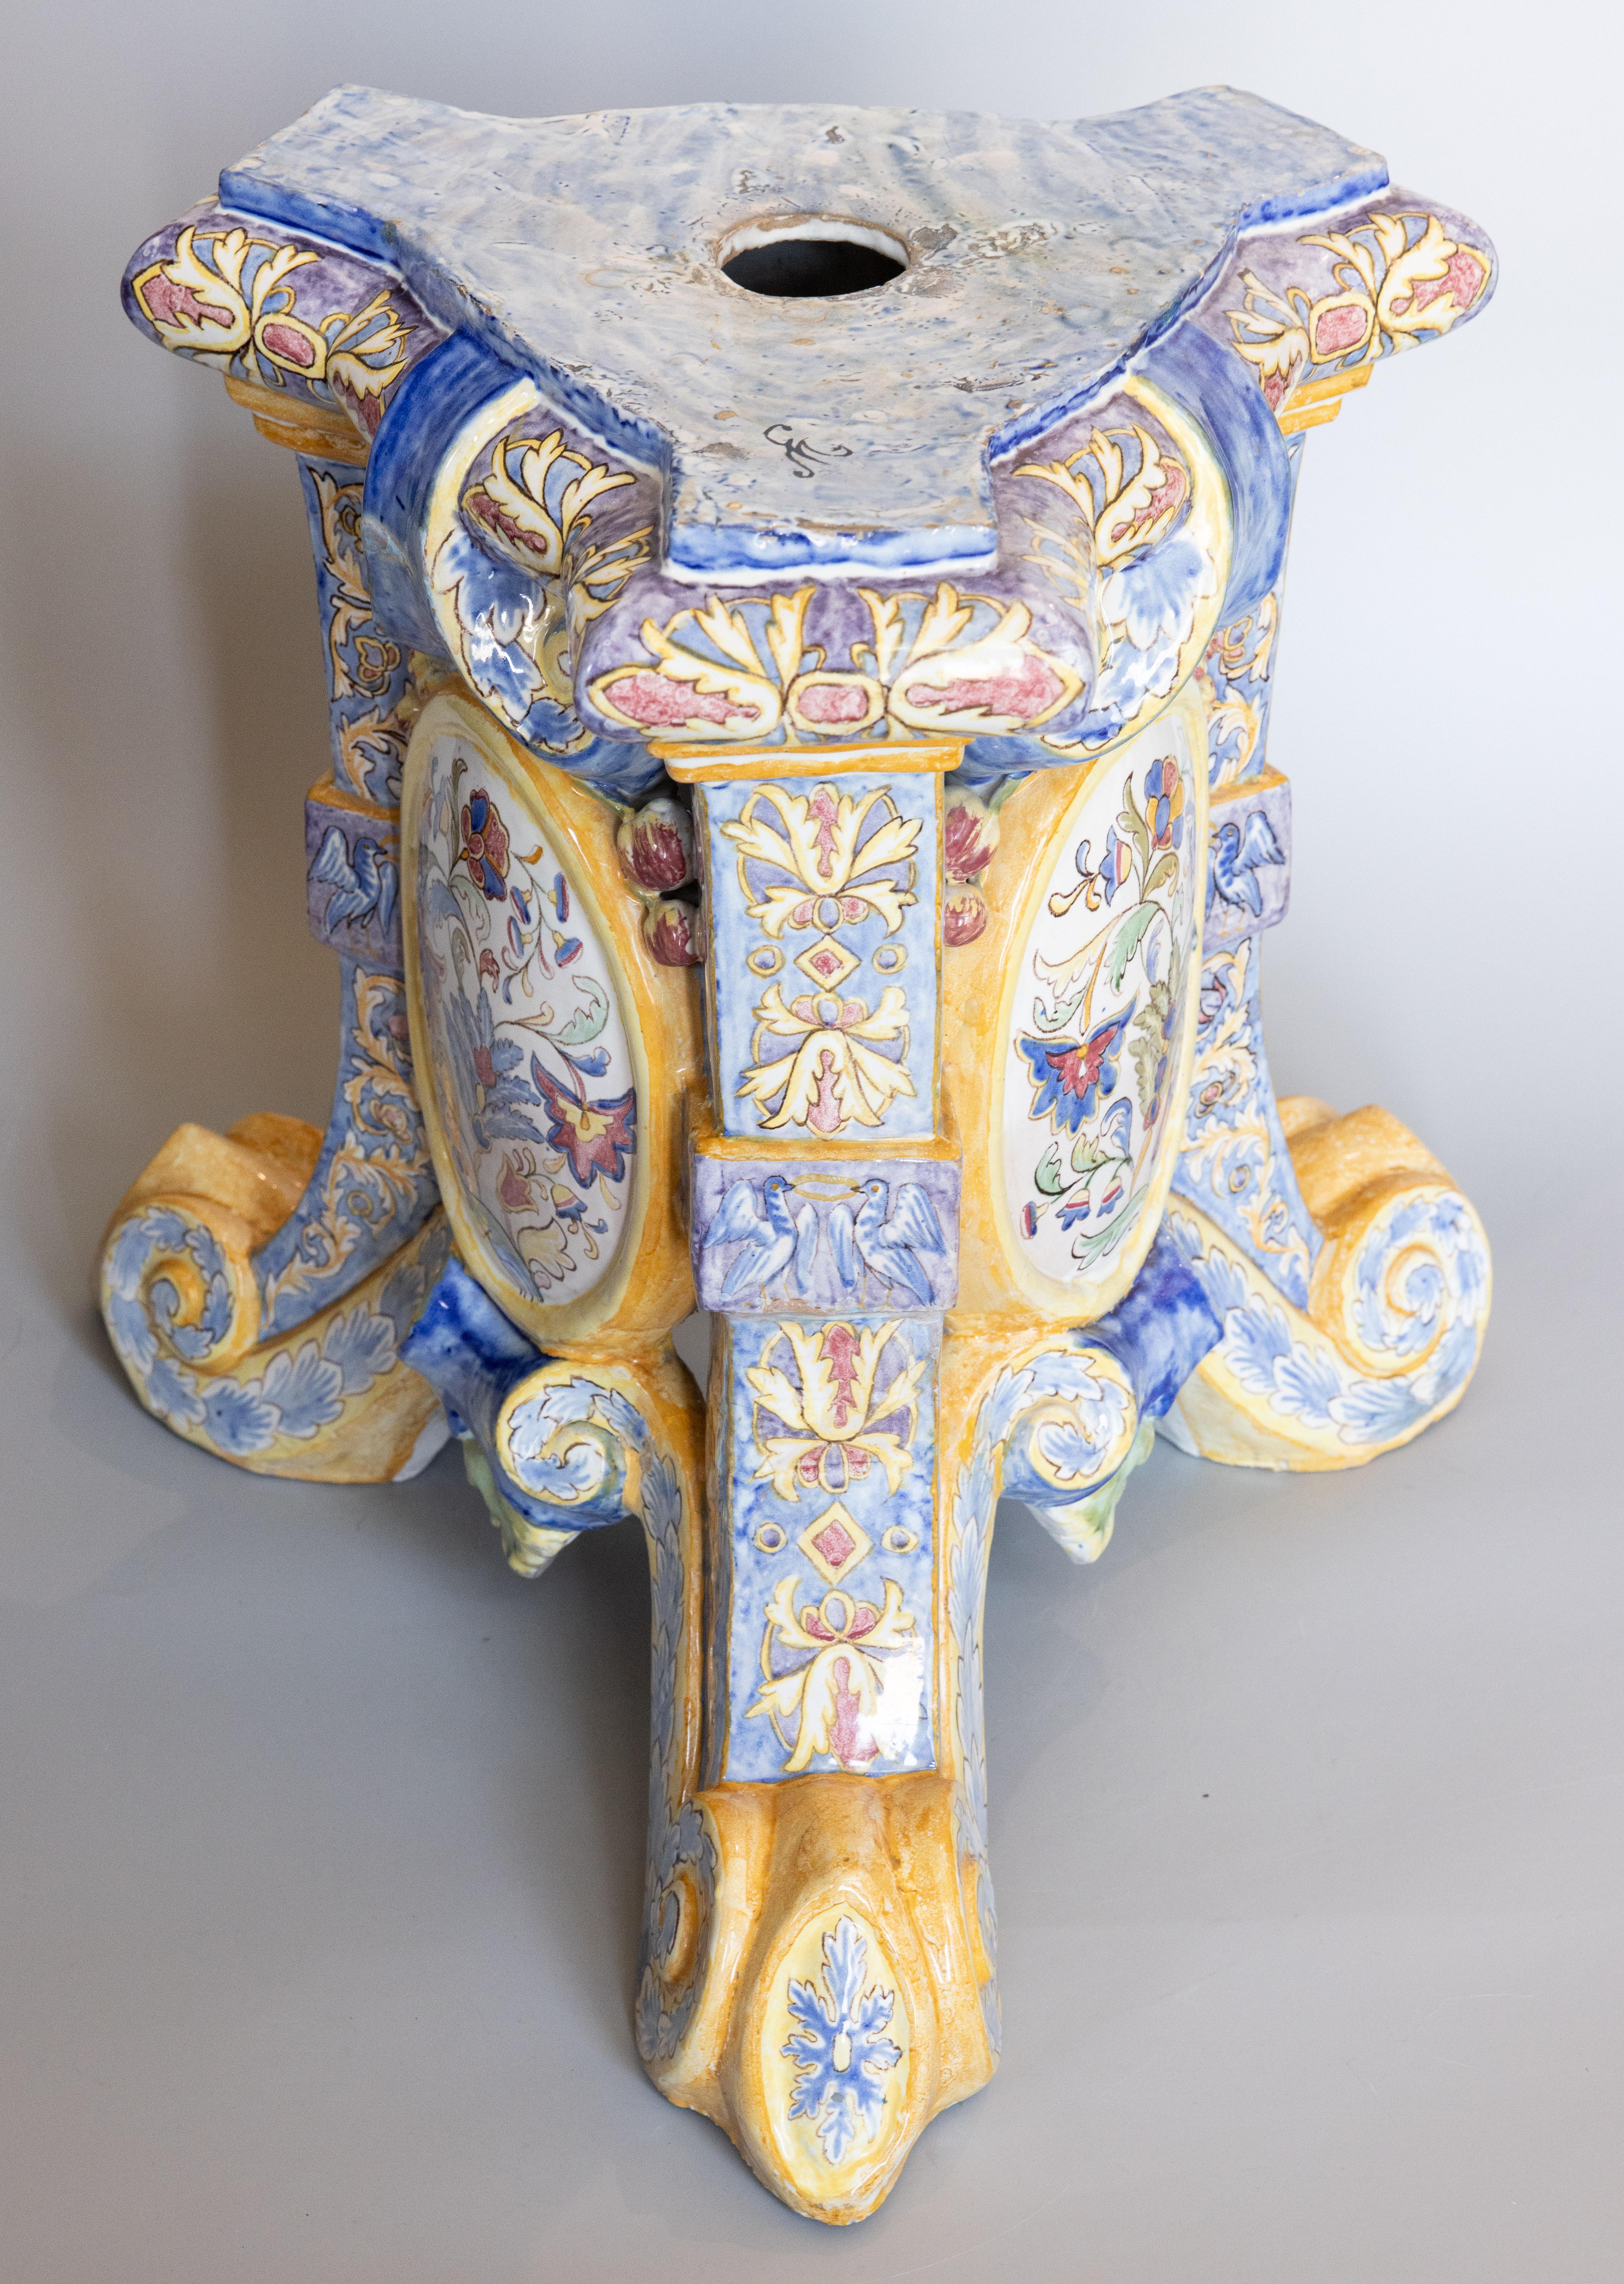 Polychromed 19th Century Italian Majolica Jardiniere Planter on Pedestal Stand For Sale